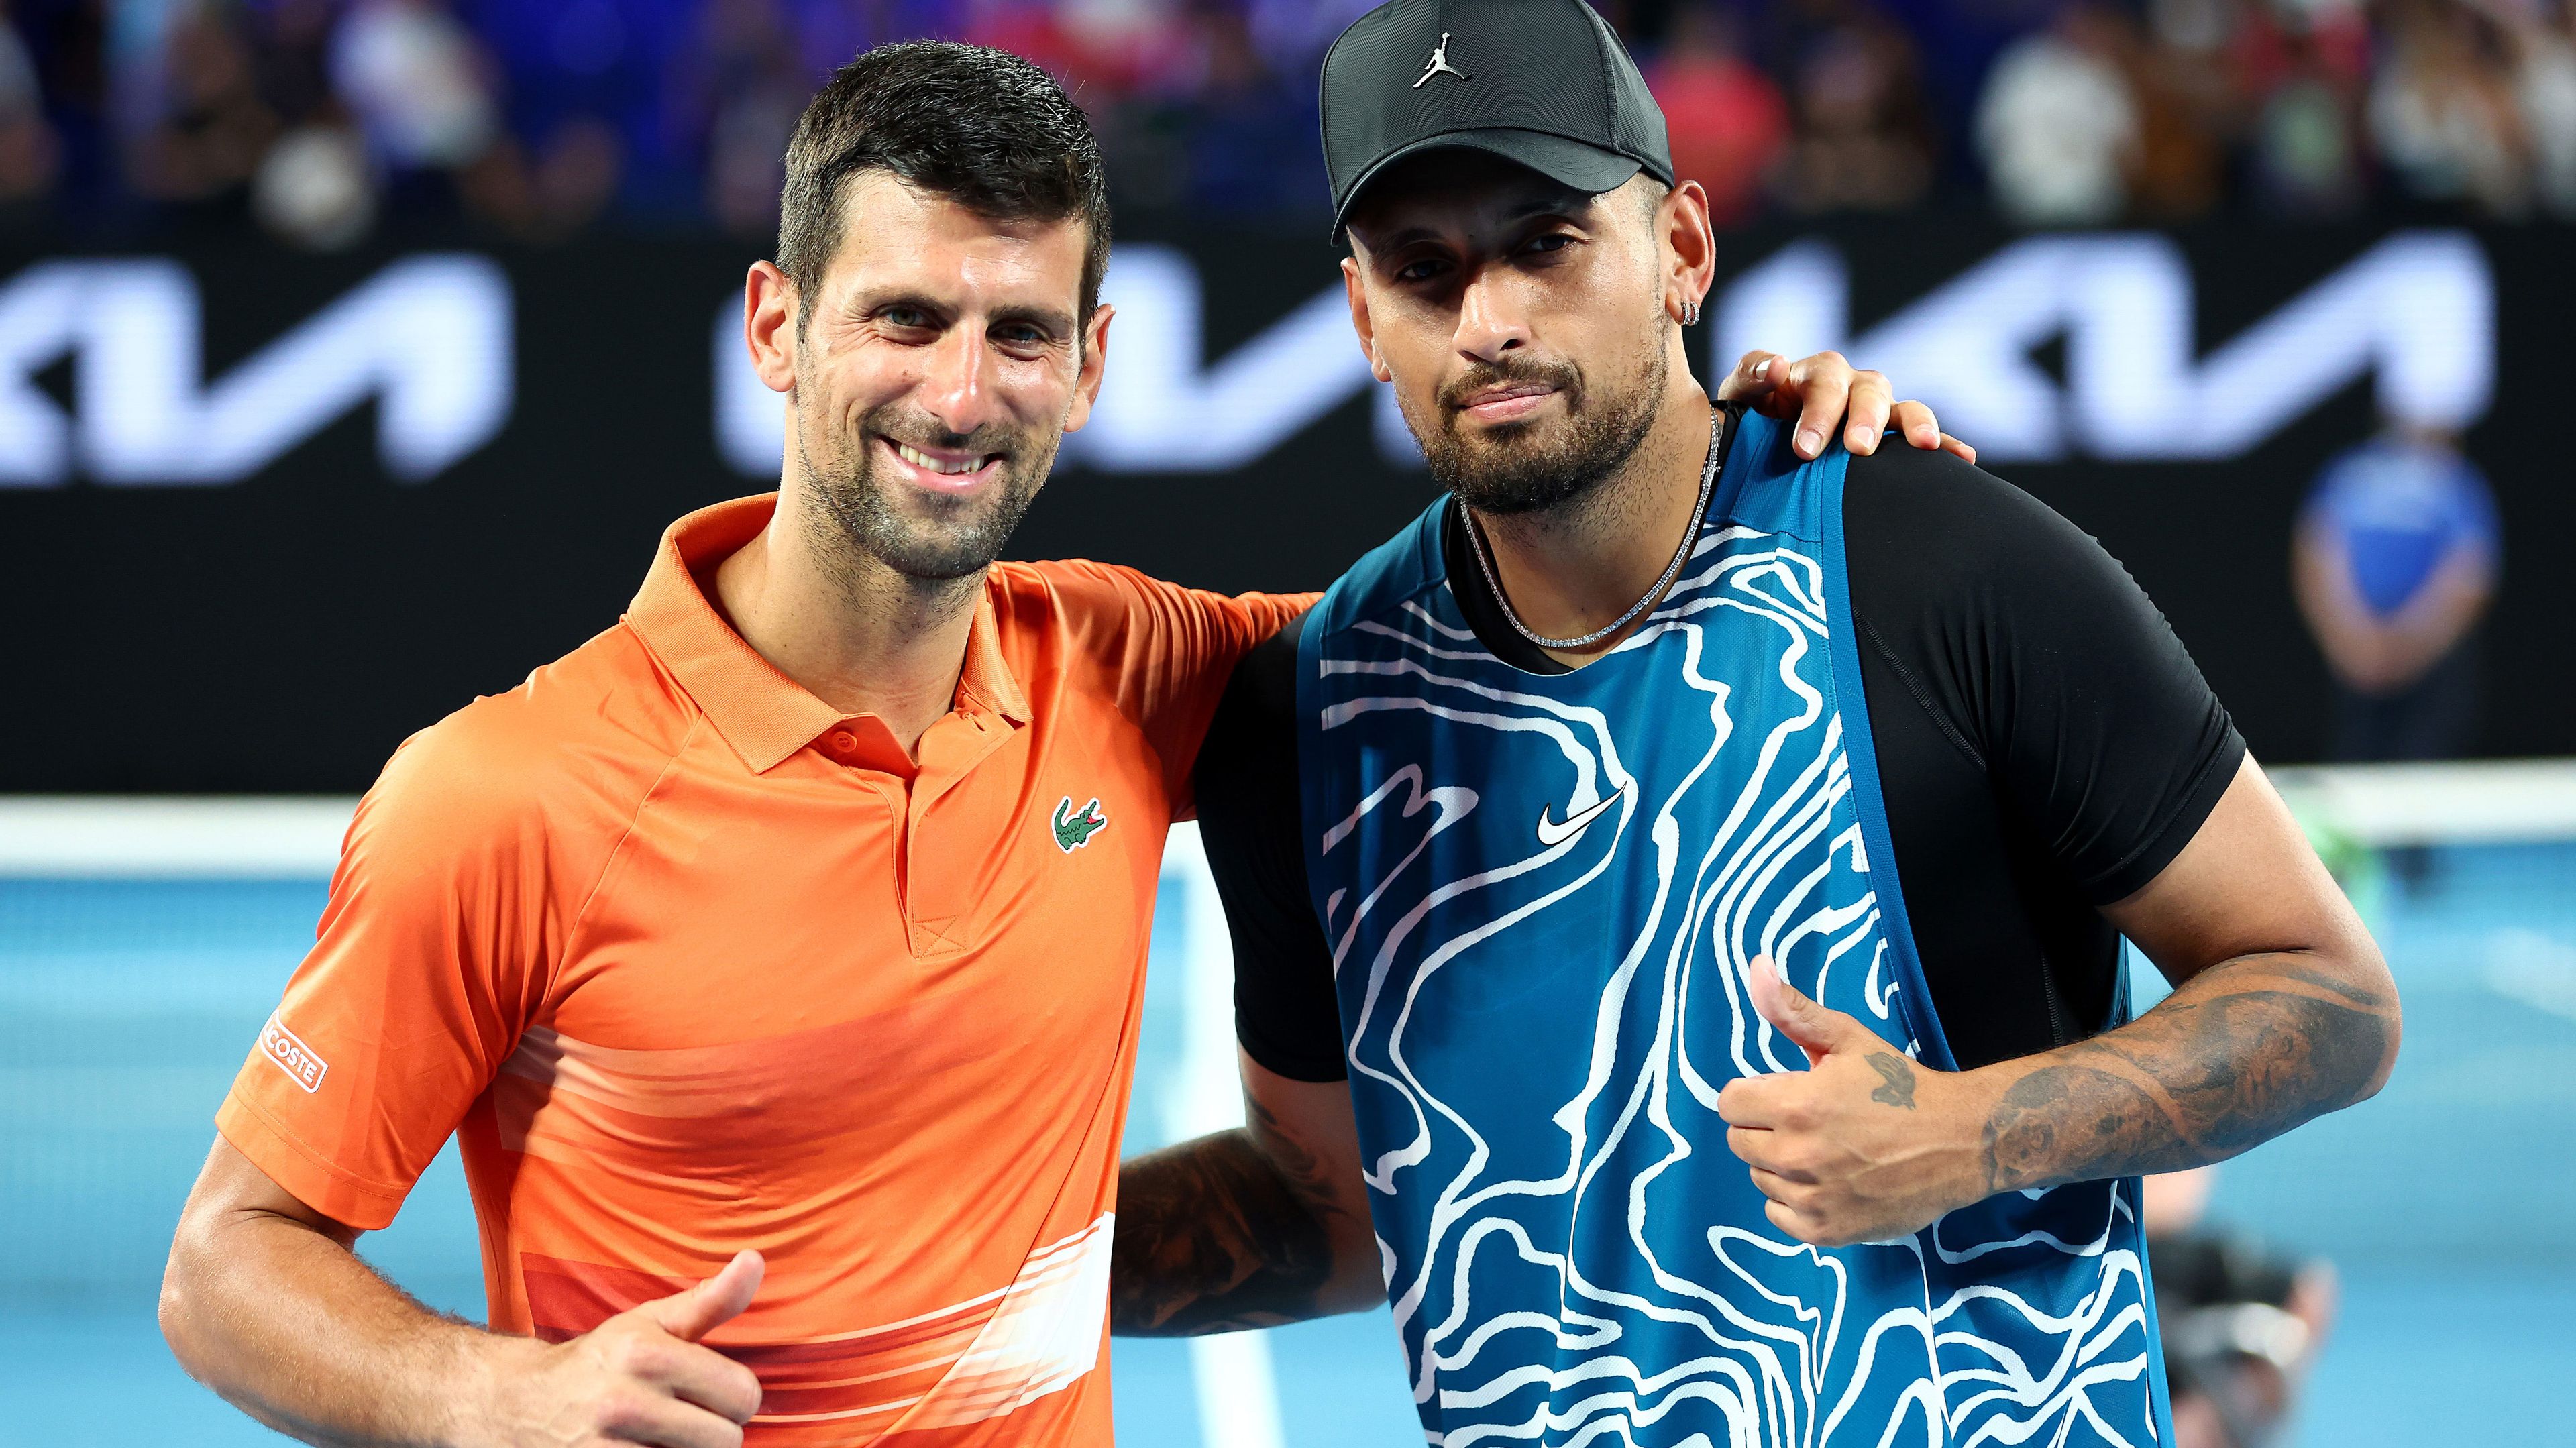 Novak Djokovic and Nick Kyrgios  pose for a photo following their Arena Showdown charity match ahead of the 2023 Australian Open.